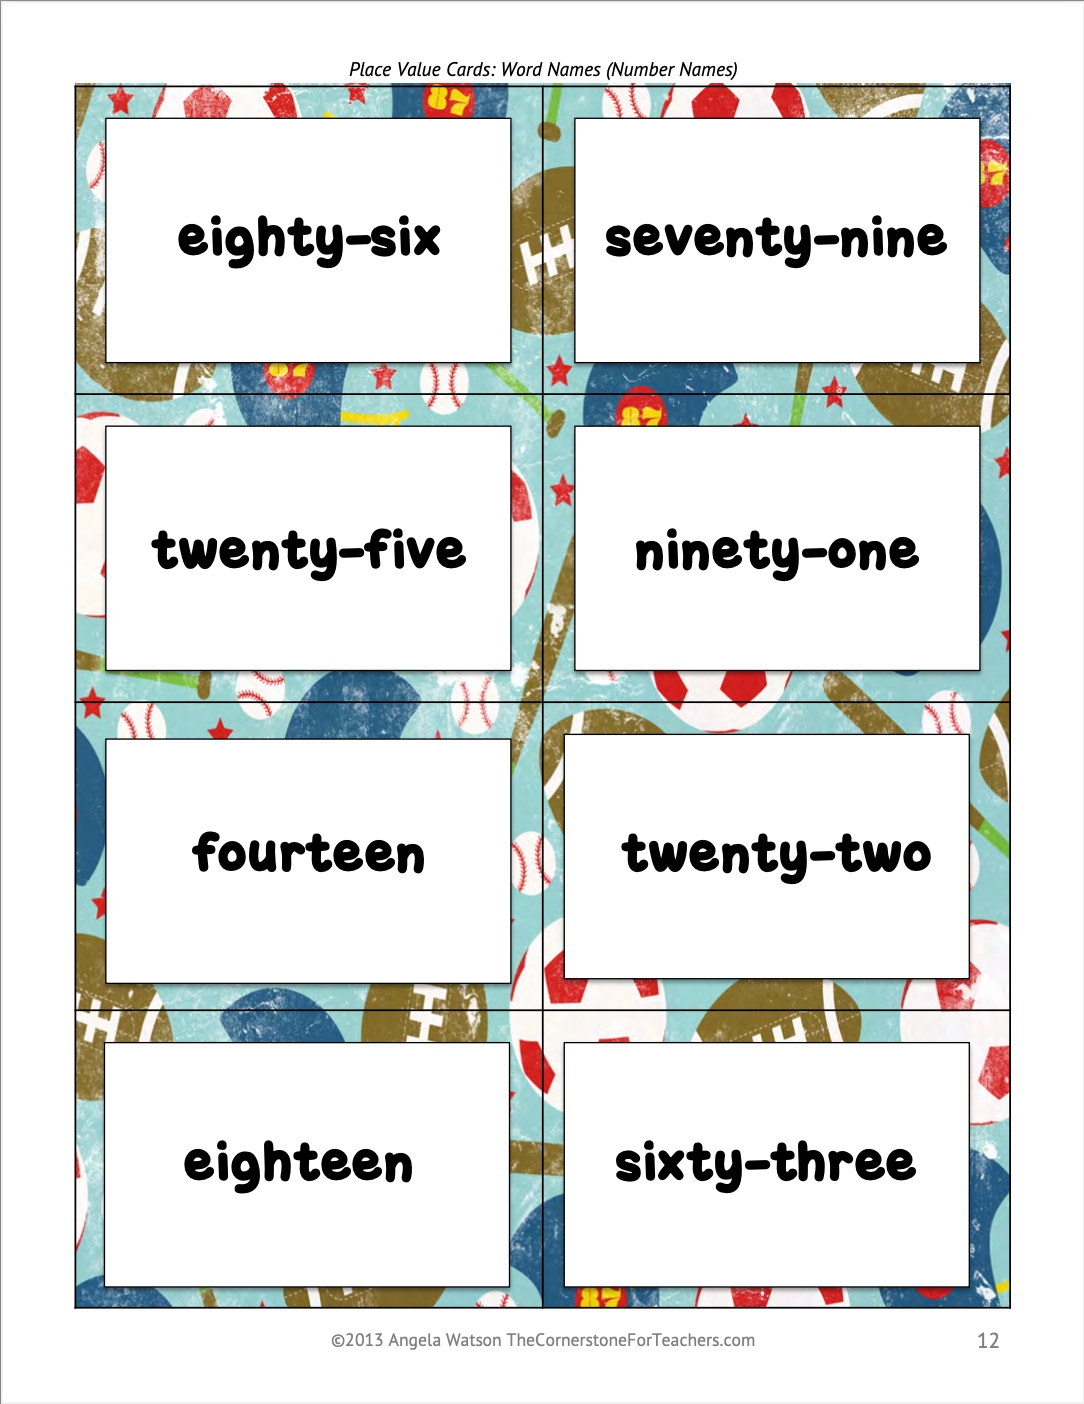 FREE Place Value Cards for sorting, matching, and other base ten activities